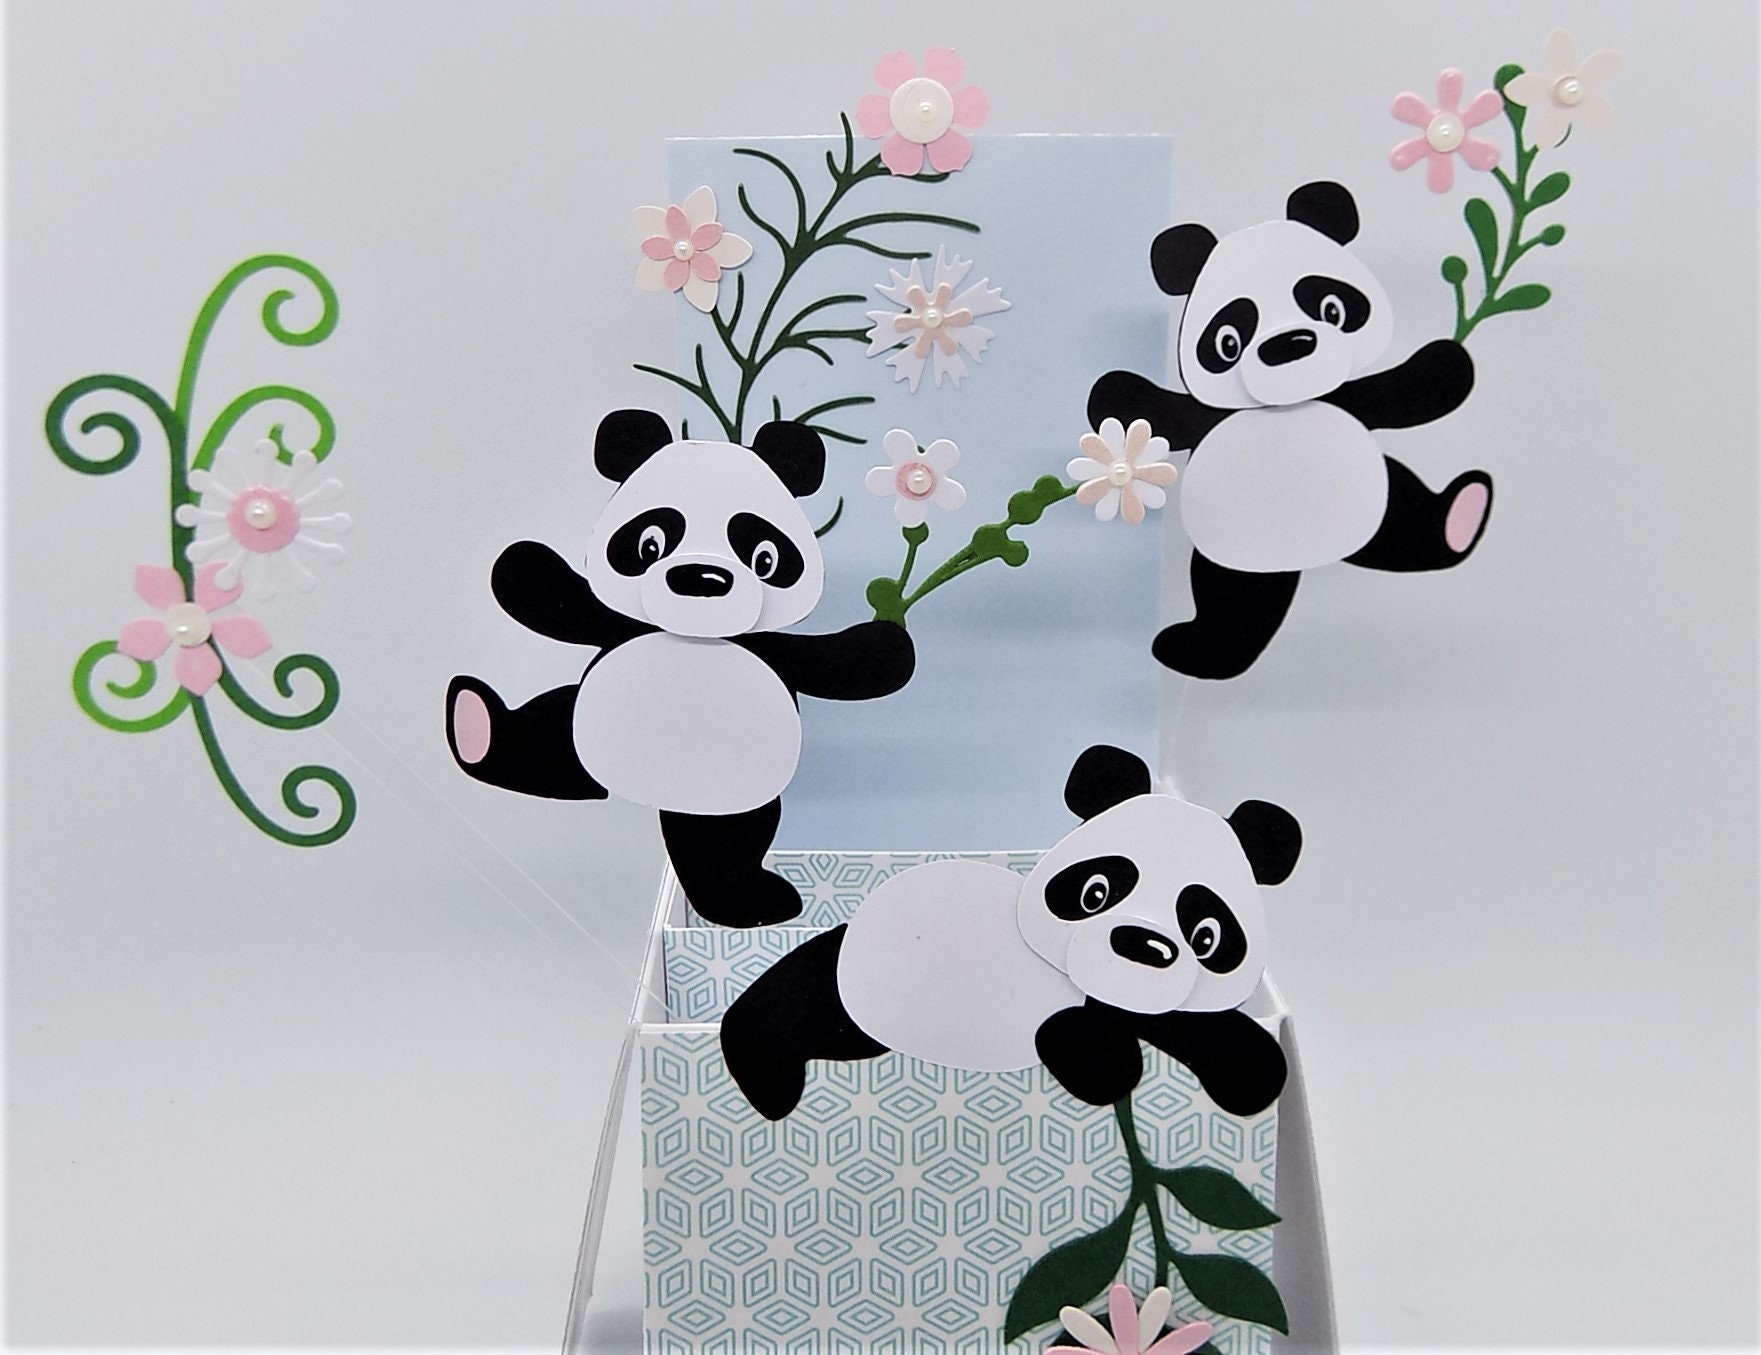 Personalise name greeting With presents and balloons Pop up Panda birthday handmade unique exploding box card Free custom personalization